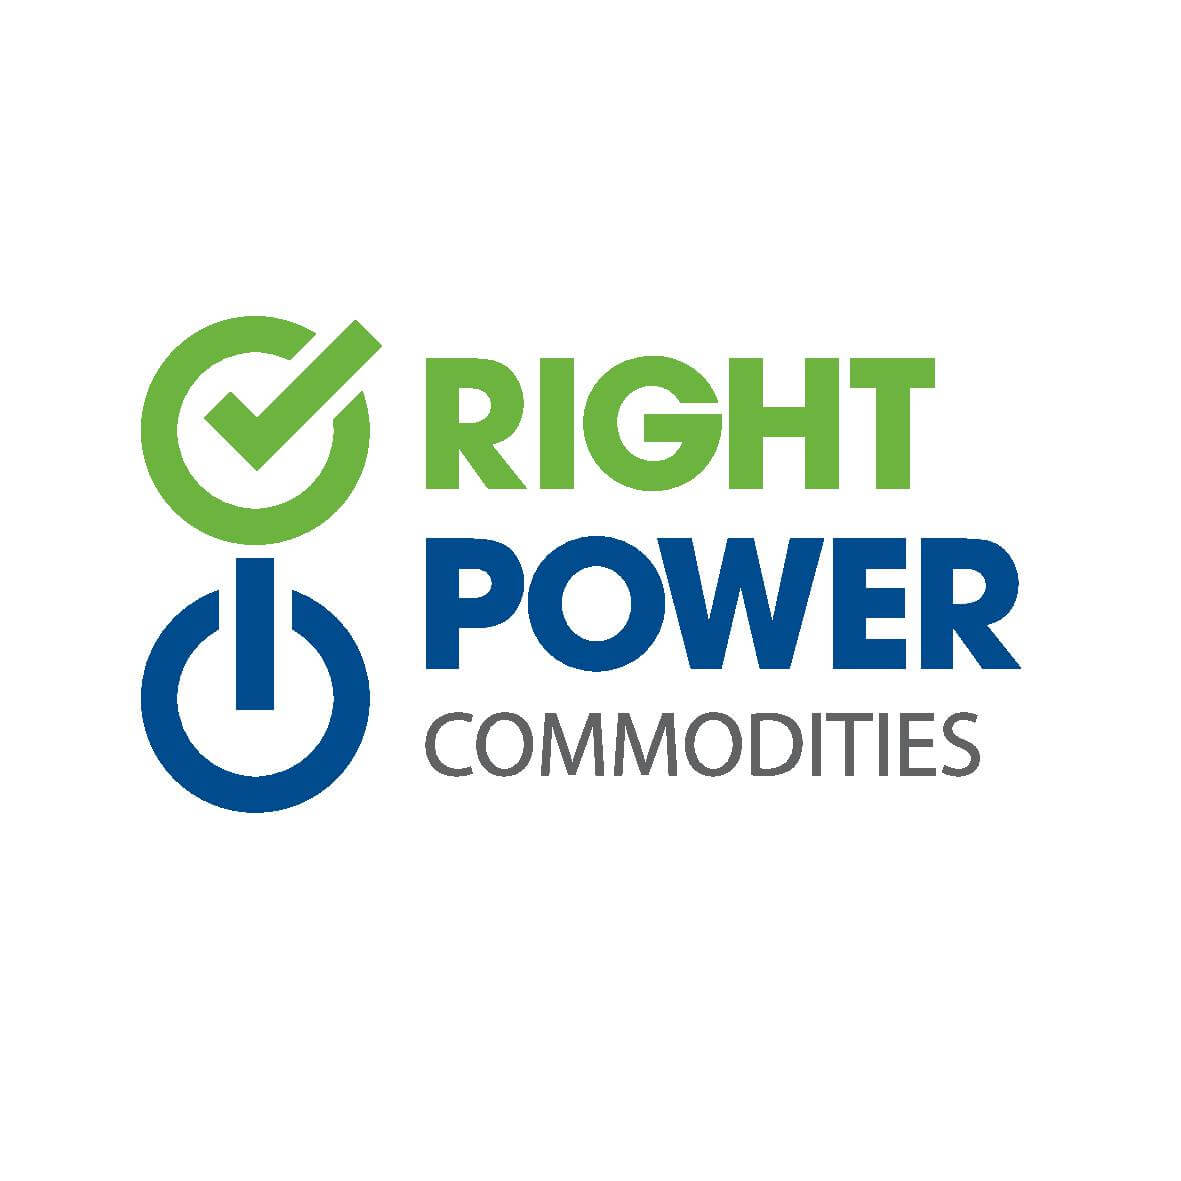 RIGHT POWER COMMODITIES